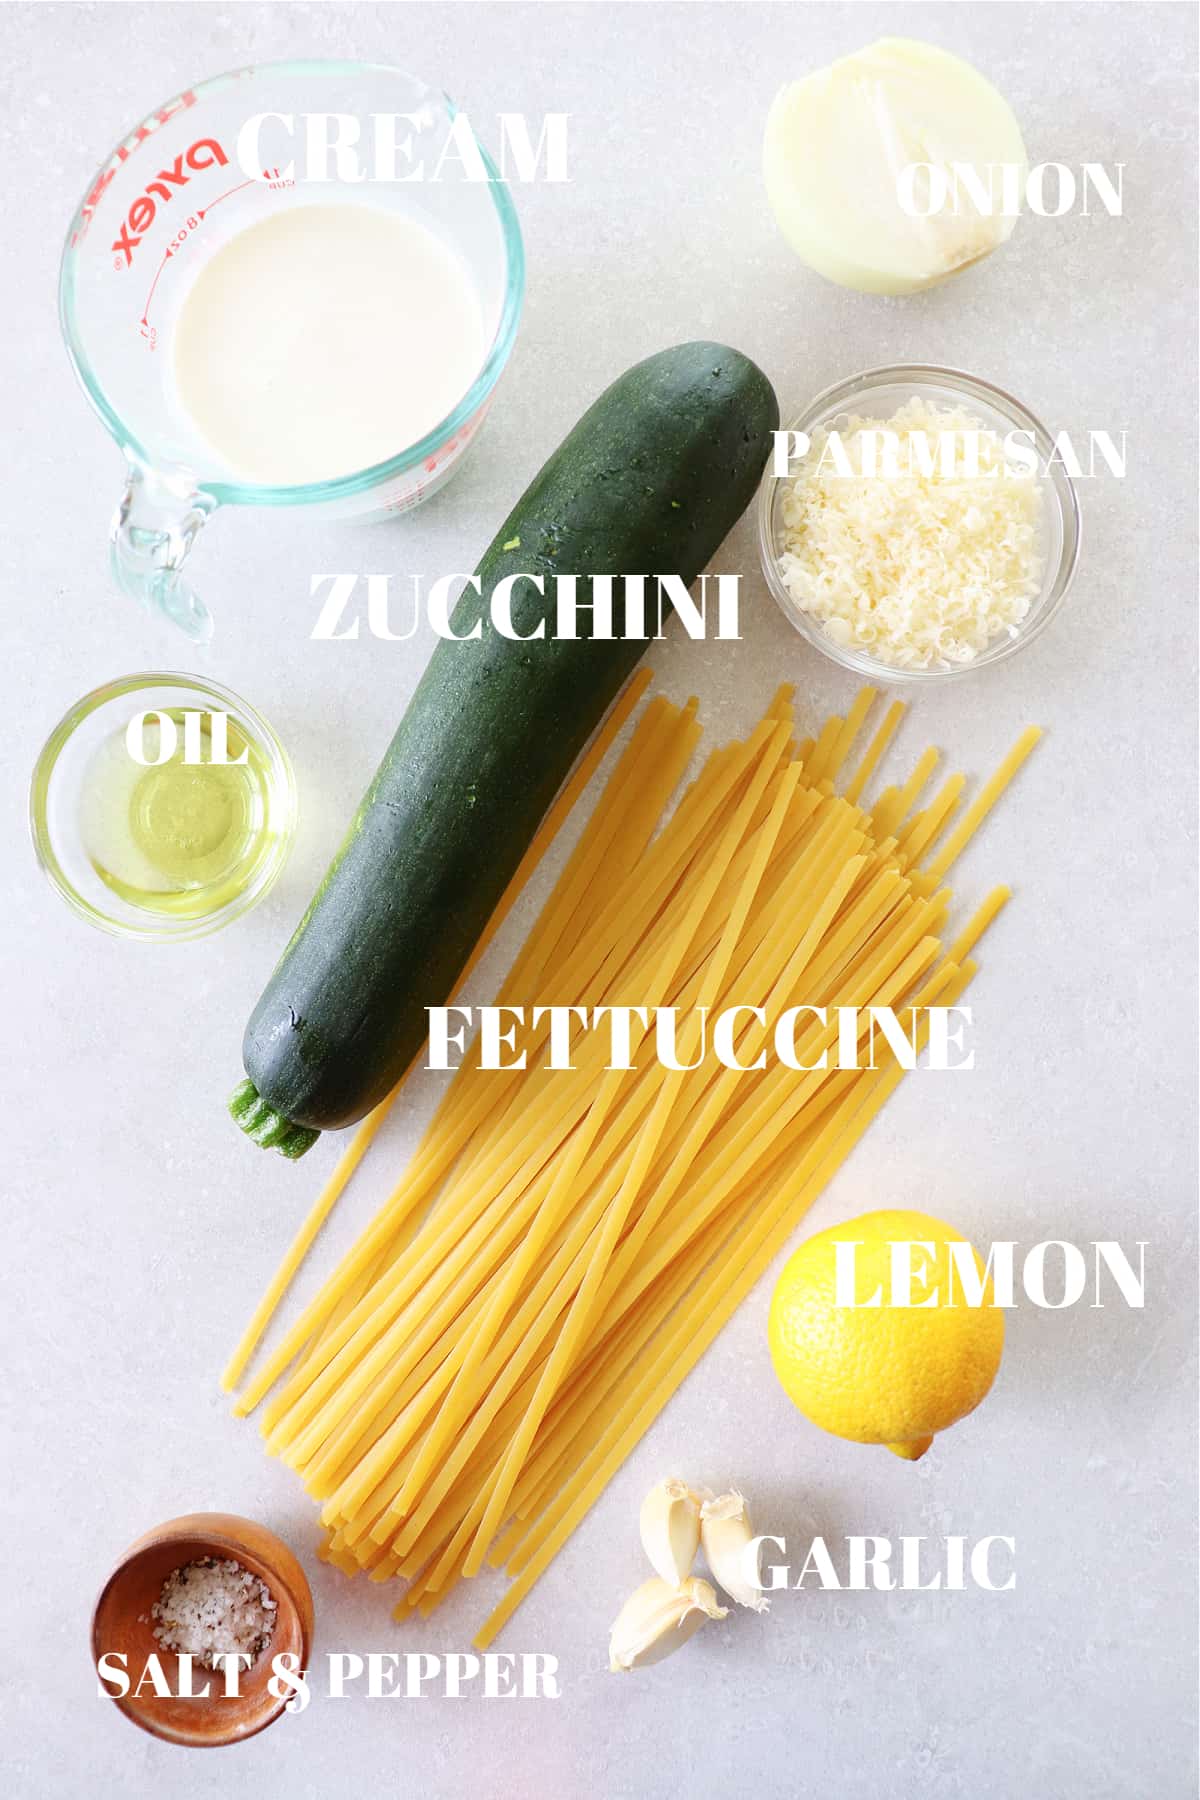 All ingredients for zucchini pasta dish on a gray board.